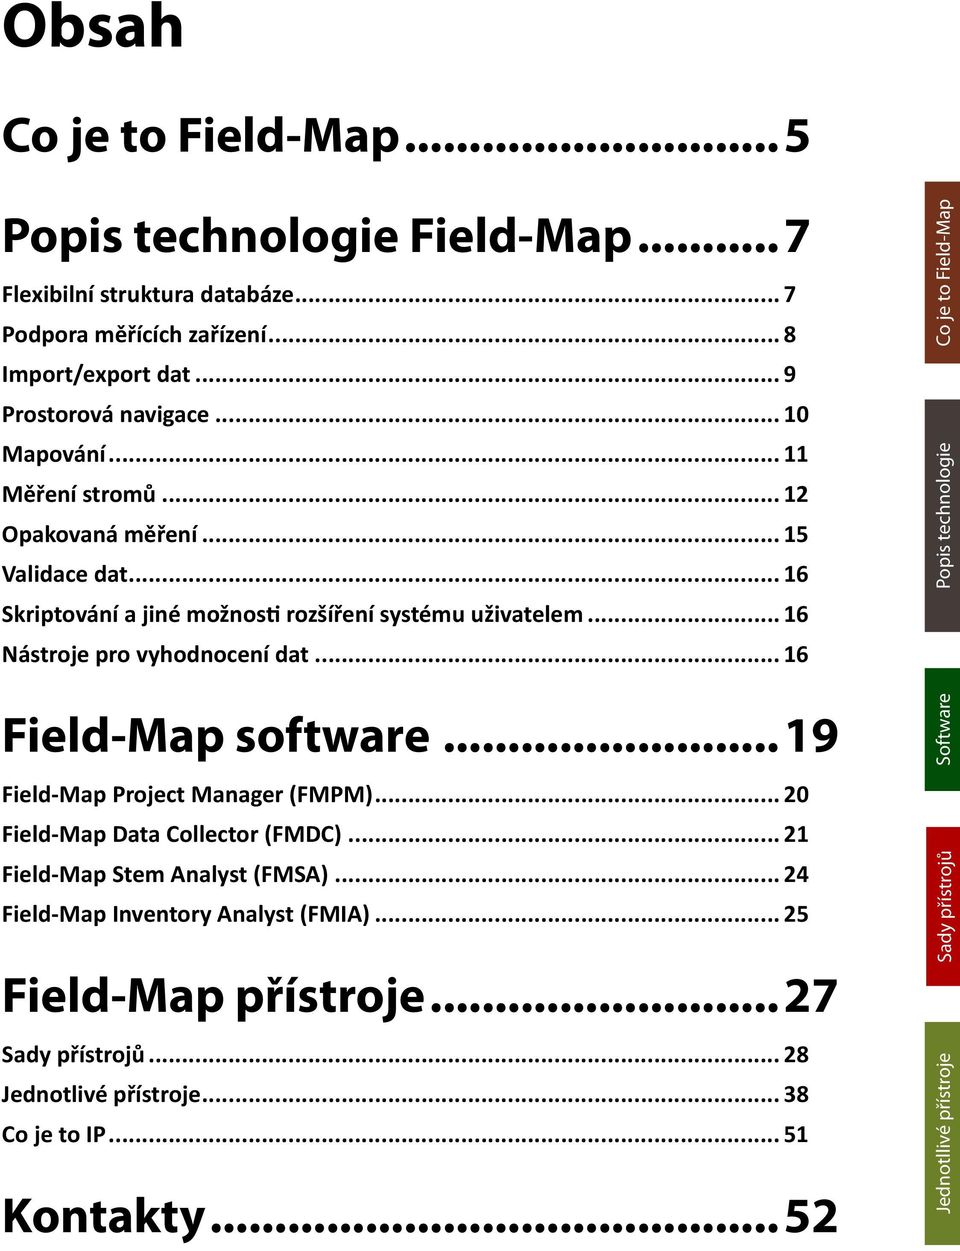 .. 16 Field-Map software...19 Field-Map Project Manager (FMPM)... 20 Field-Map Data Collector (FMDC)... 21 Field-Map Stem Analyst (FMSA)... 24 Field-Map Inventory Analyst (FMIA).